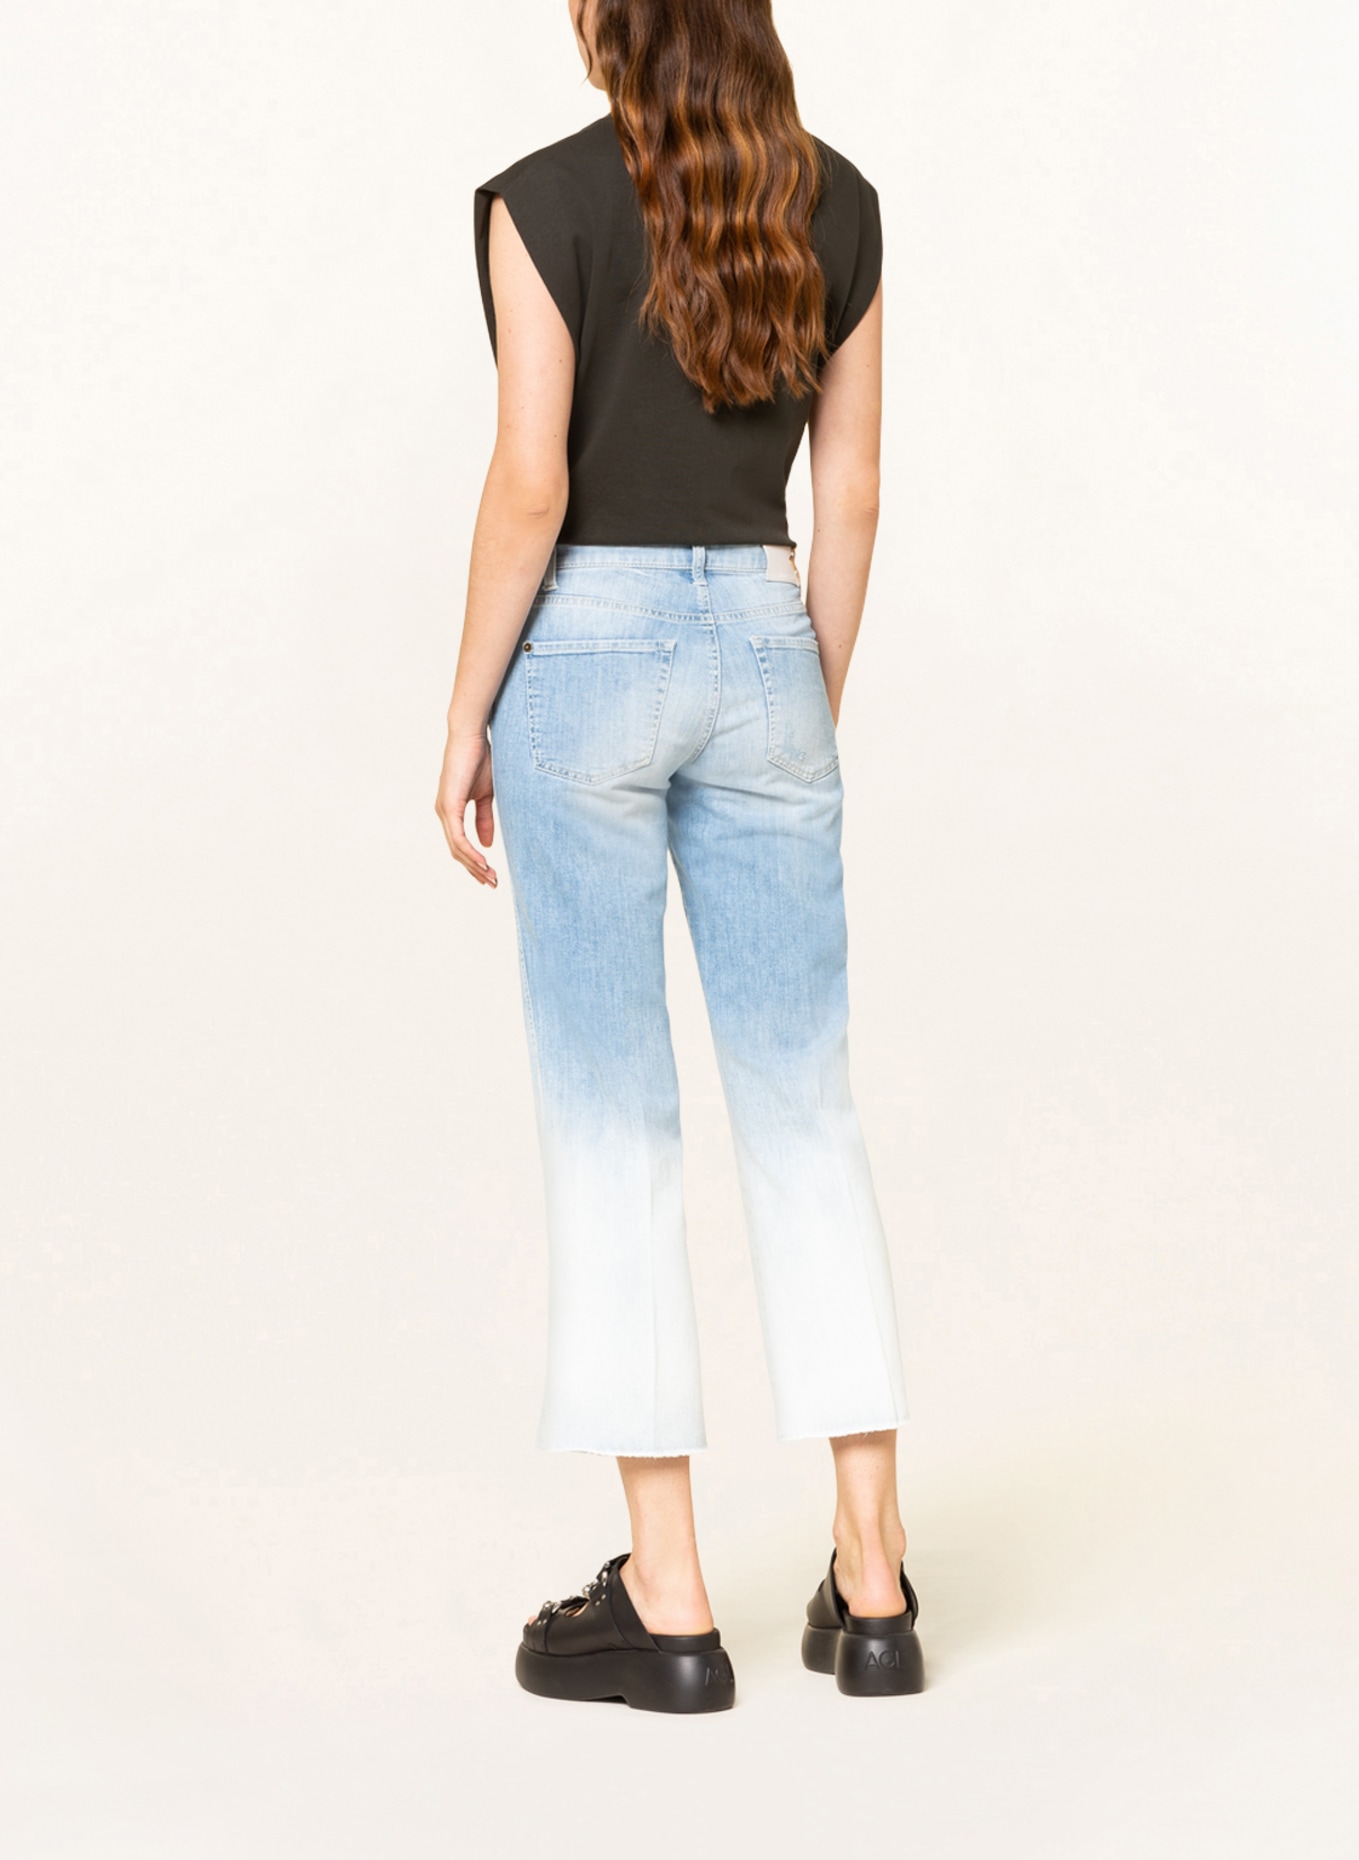 CAMBIO Bootcut jeans FRANCESCA, Color: 5323 summer degrade fringed he (Image 3)